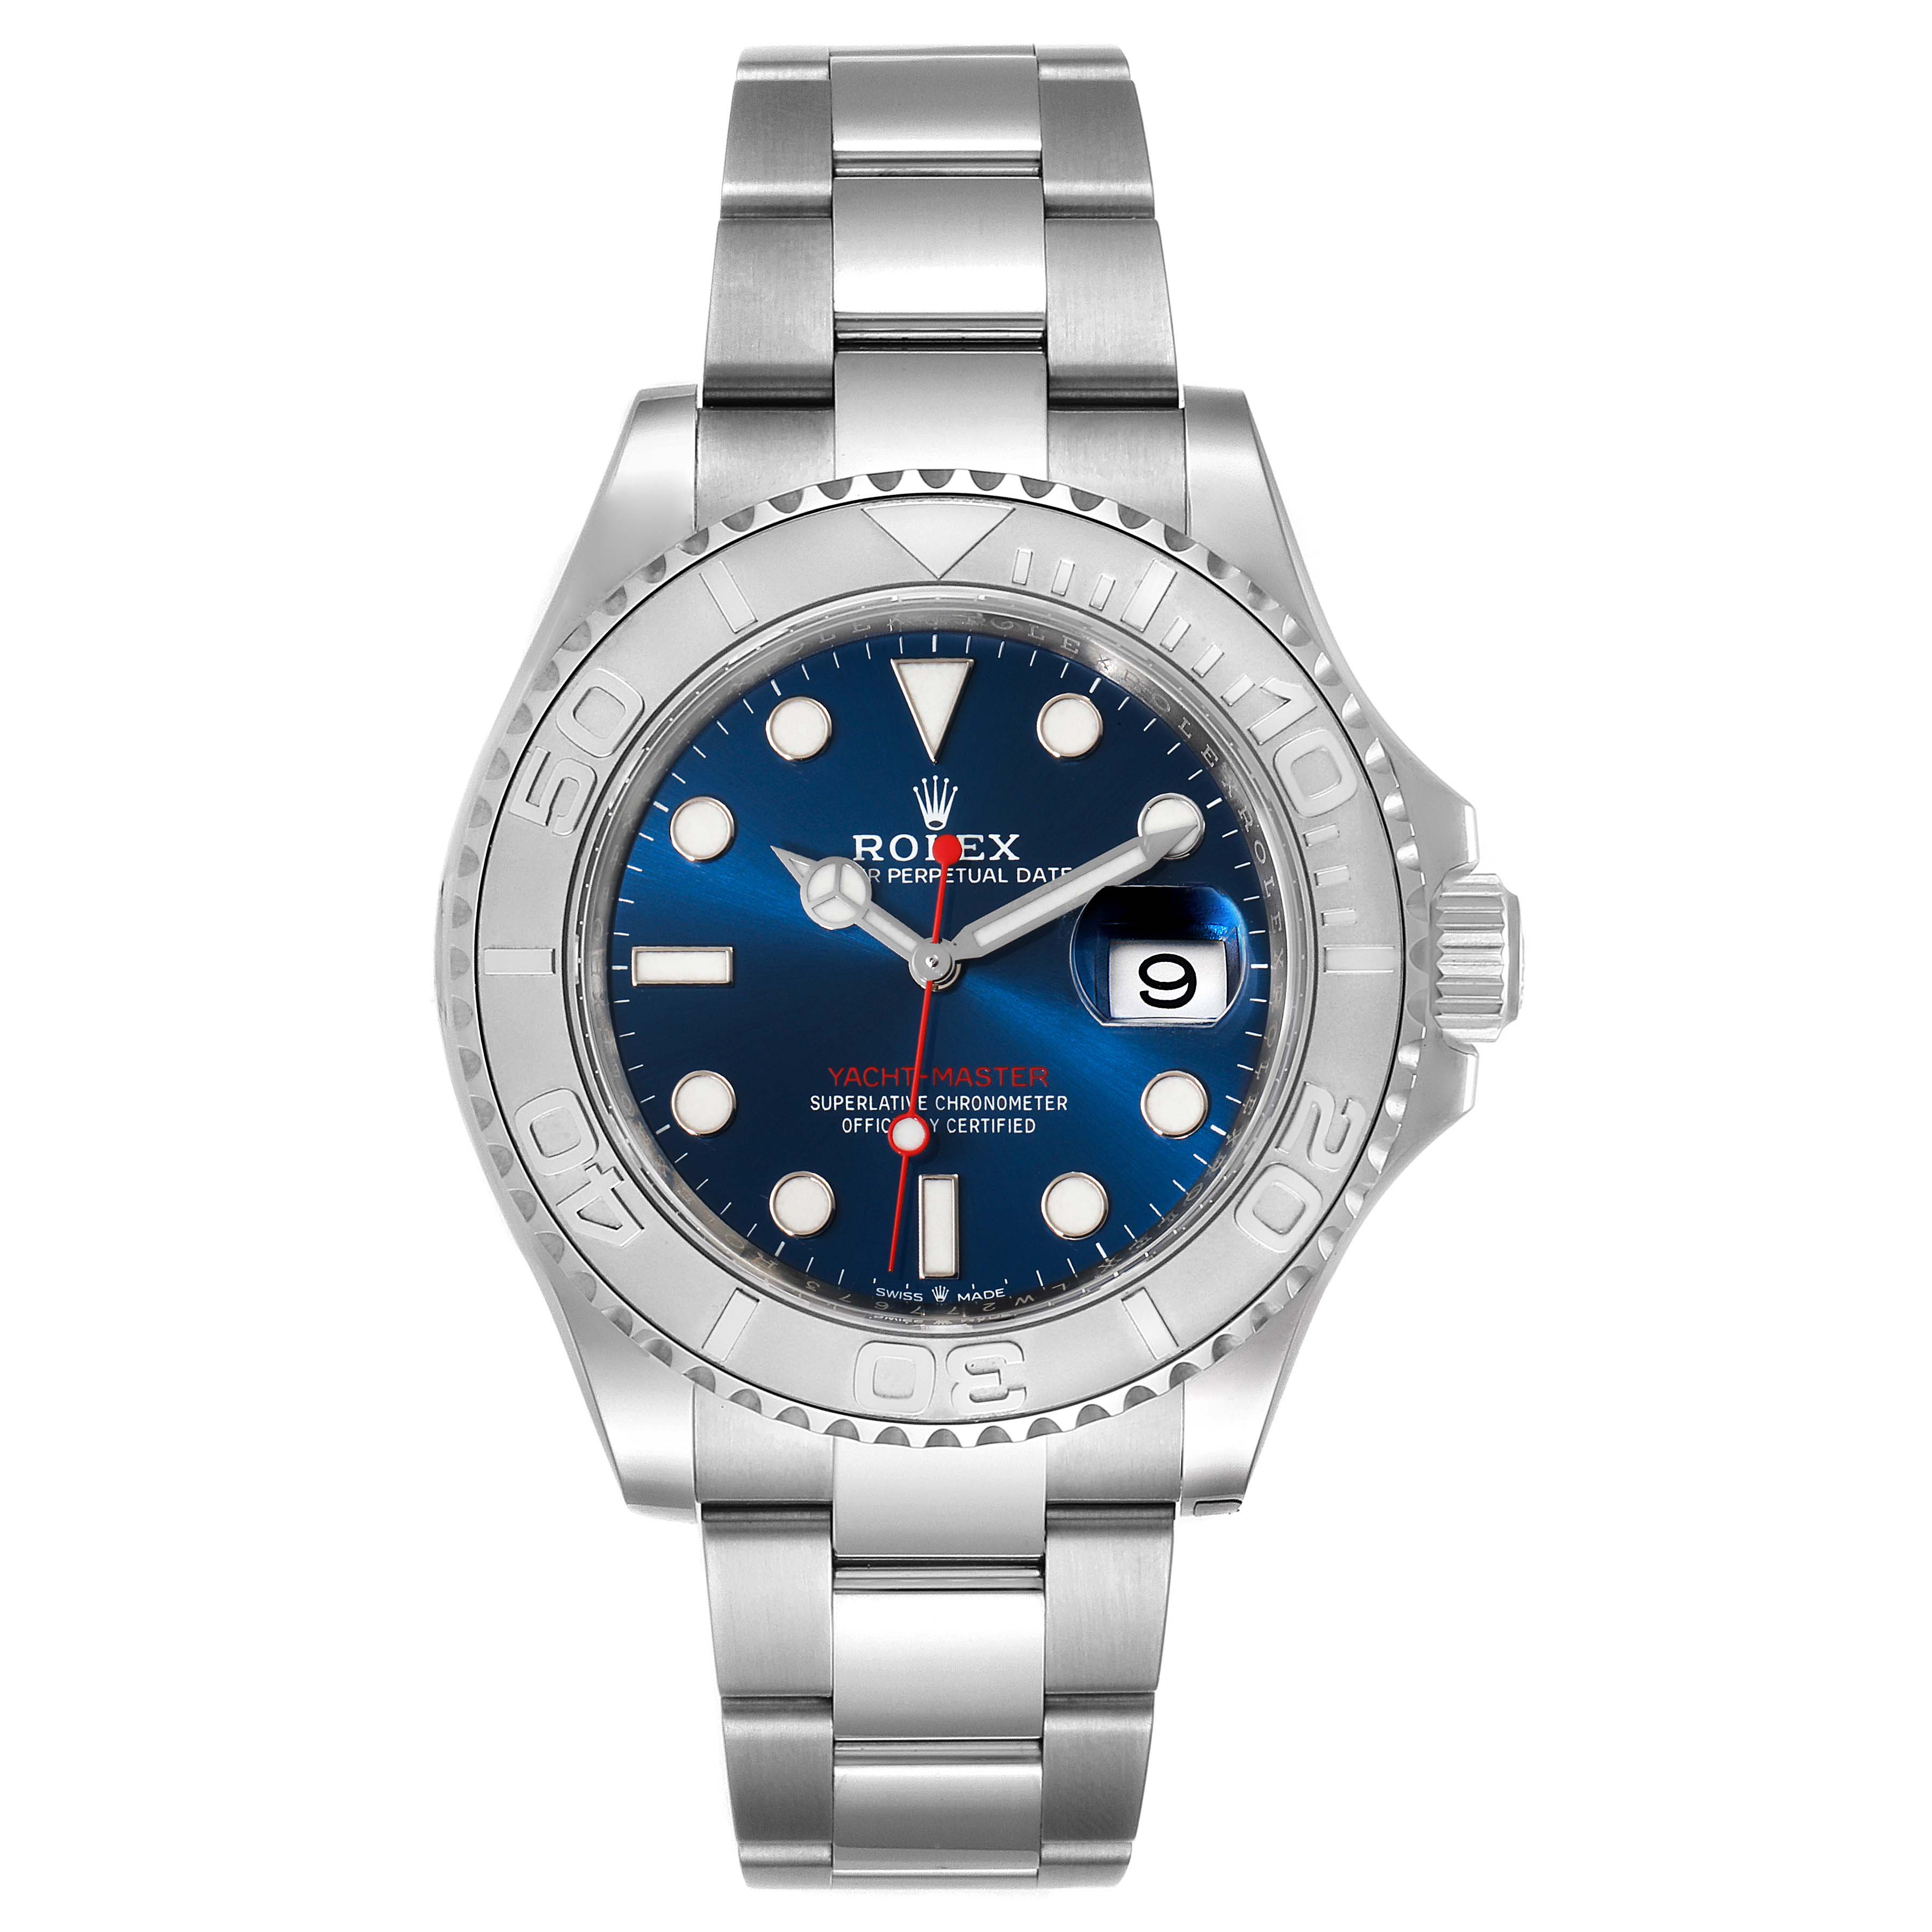 Rolex Yachtmaster Stainless Steel Platinum Blue Dial Watch 126622 Box ...